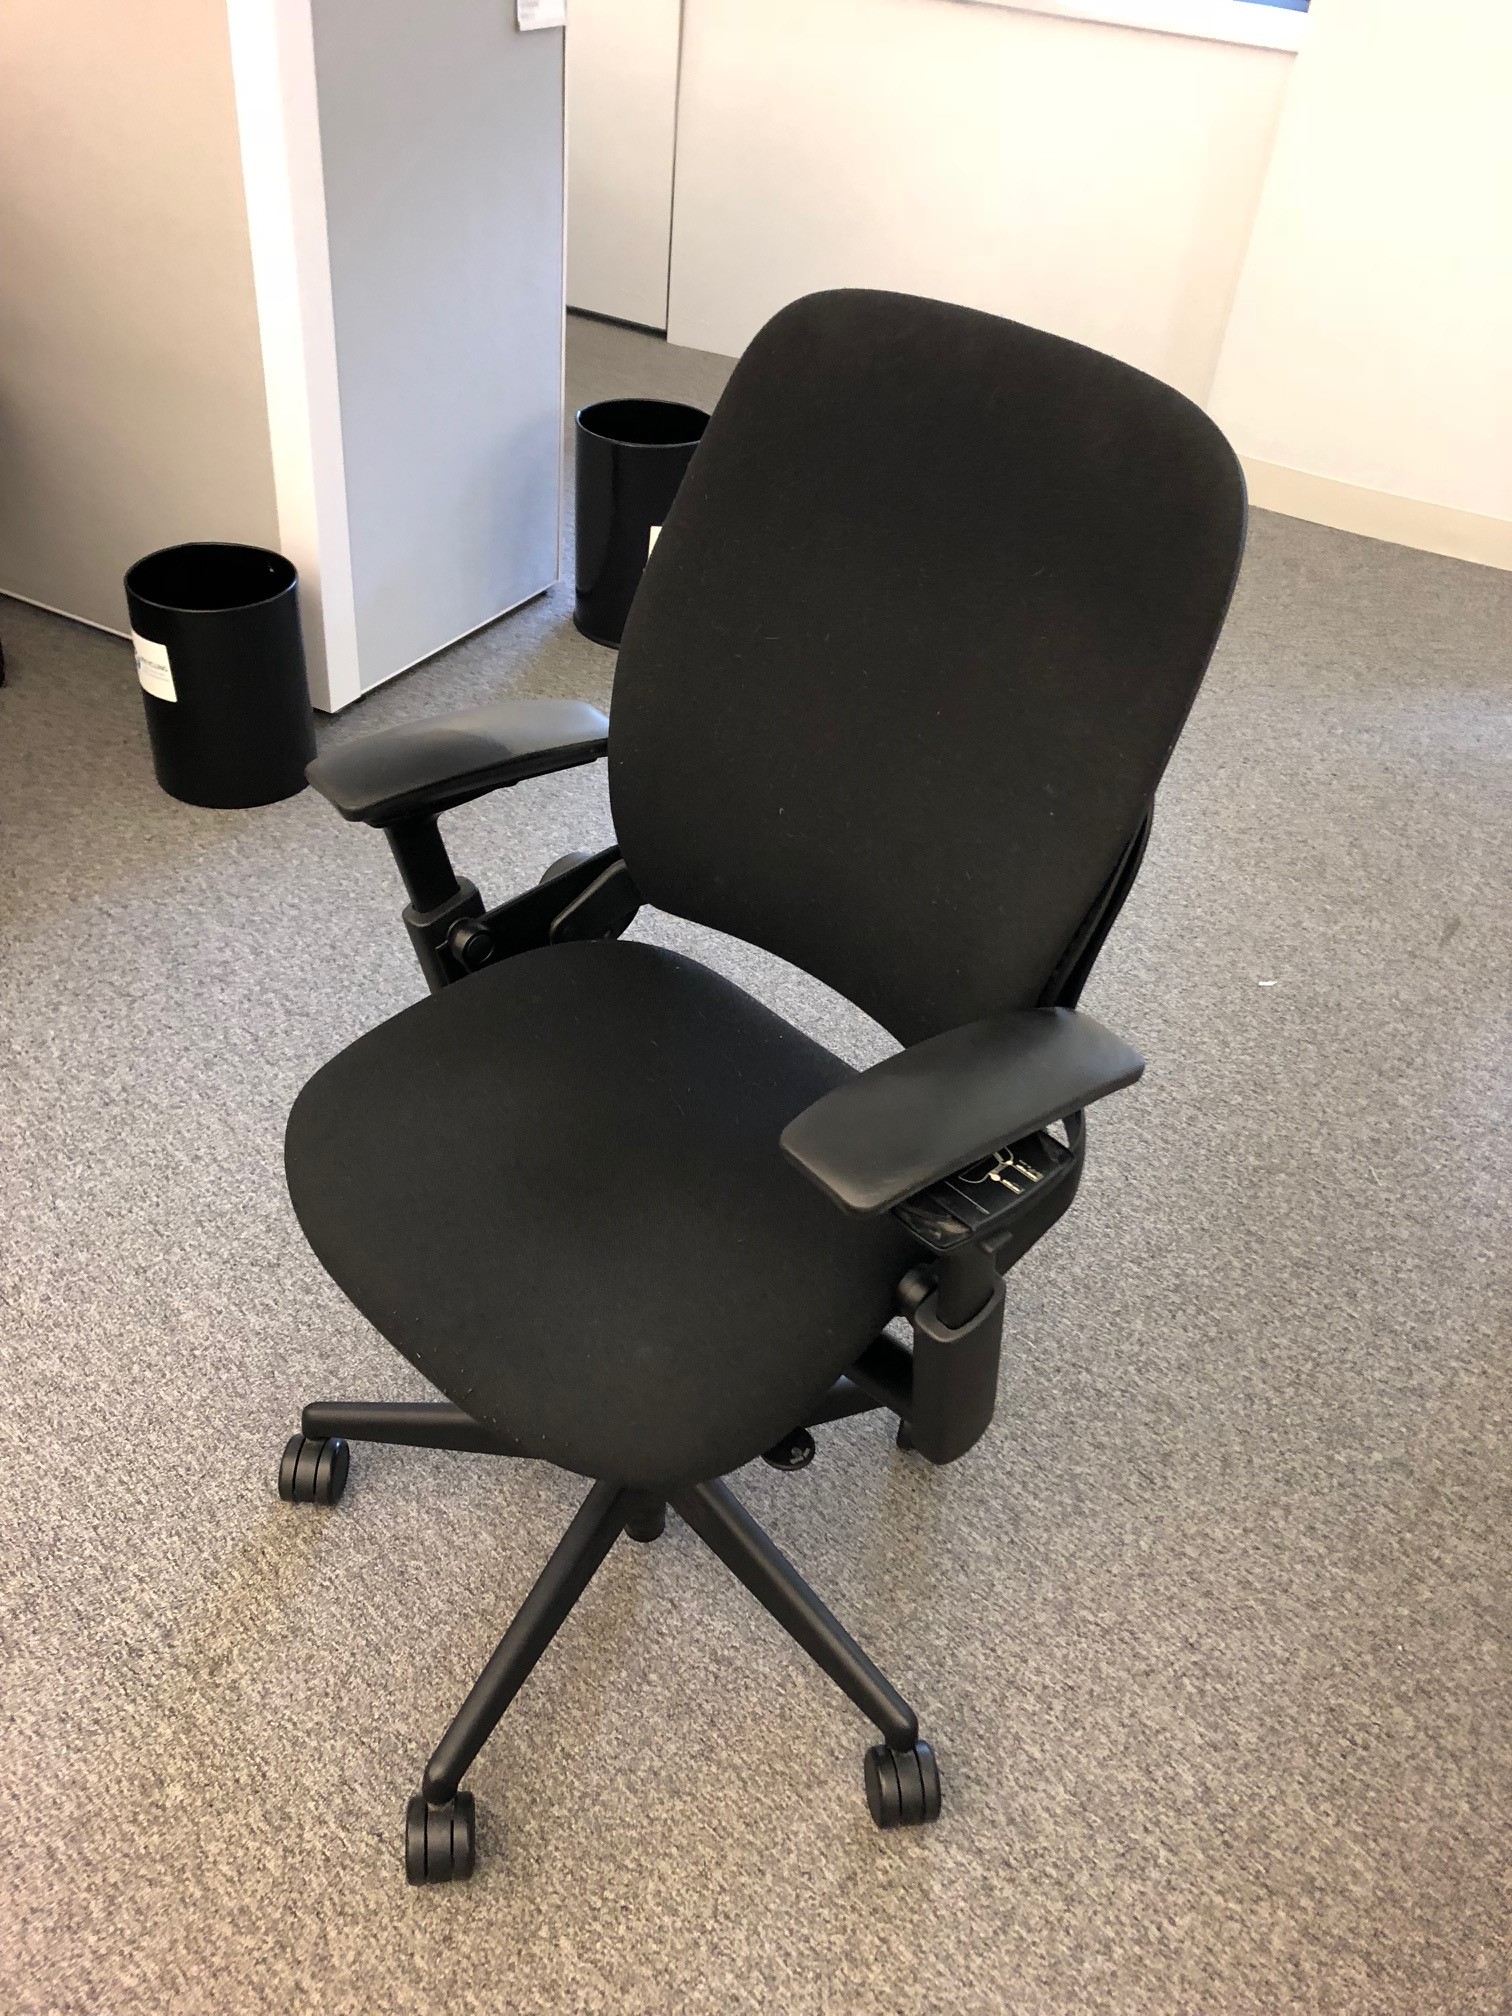 C61365 - Steelcase Leap Chairs